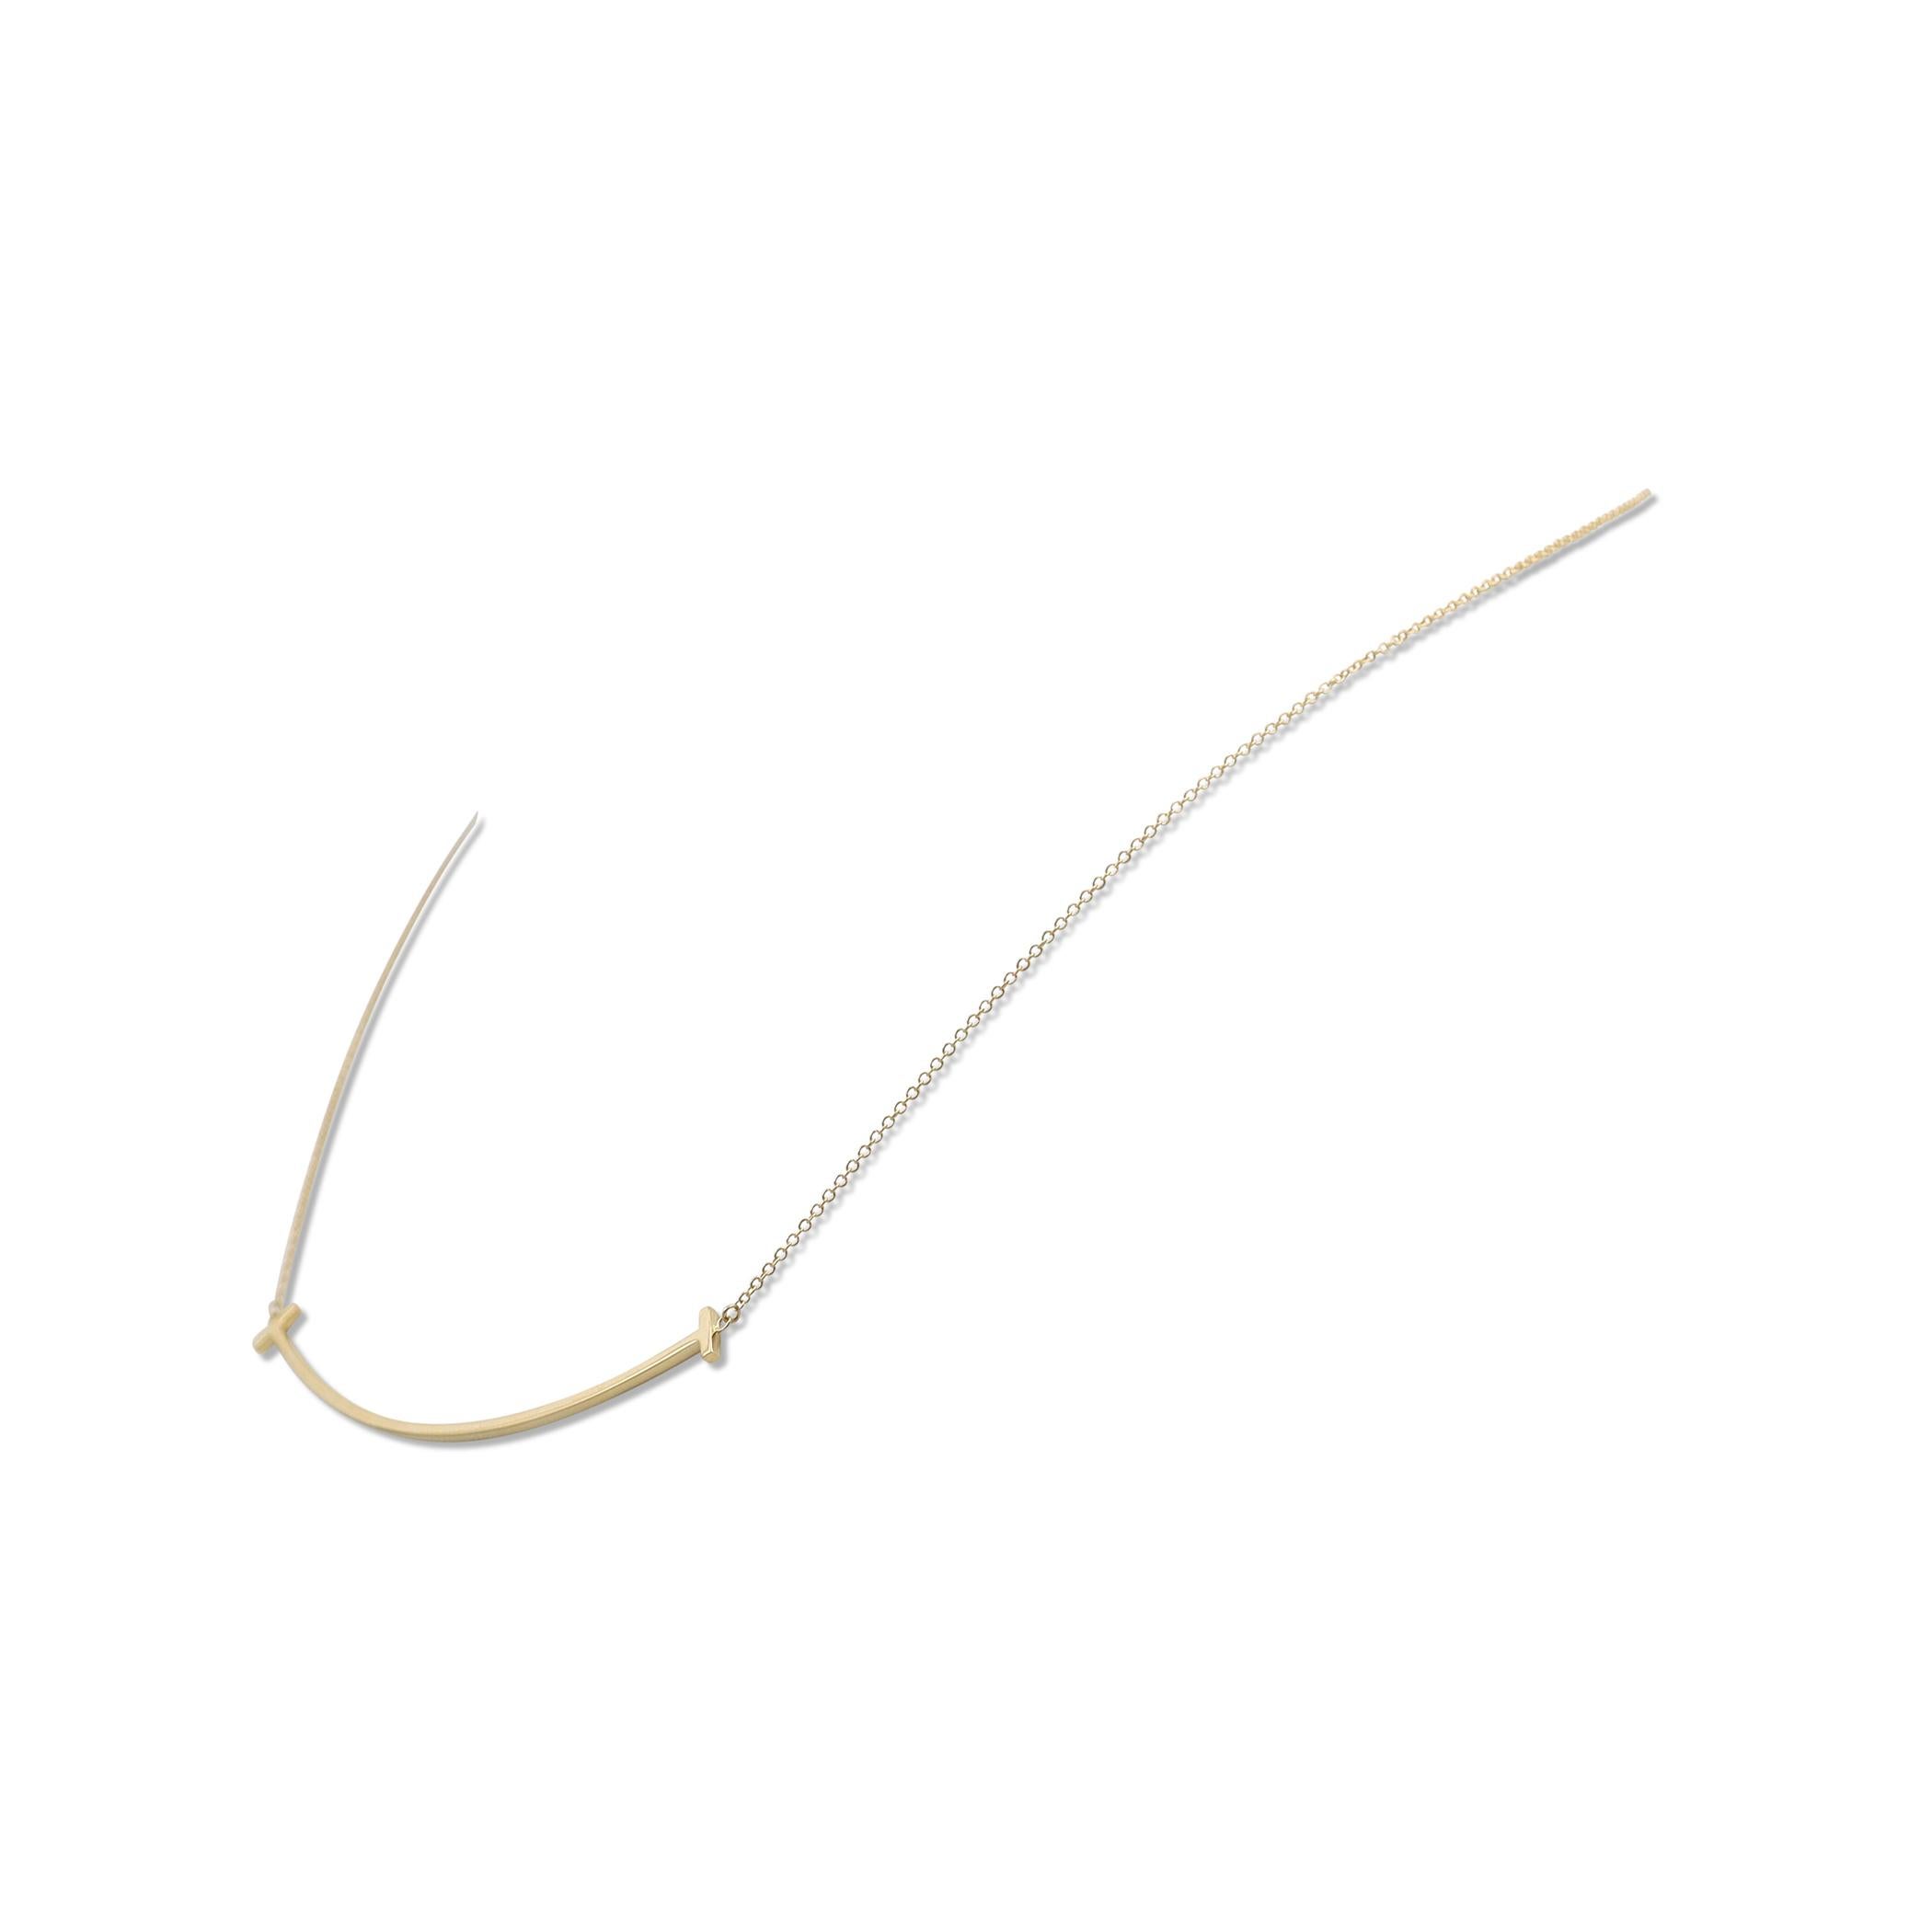 Authentic Tiffany & Co. 18 karat yellow gold 'smile' necklace from the Tiffany T collection. A timeless design that is a tribute to the world's most universal gesture, the smile. The necklace measures 18 inches in length. Signed Tiffany & Co.,